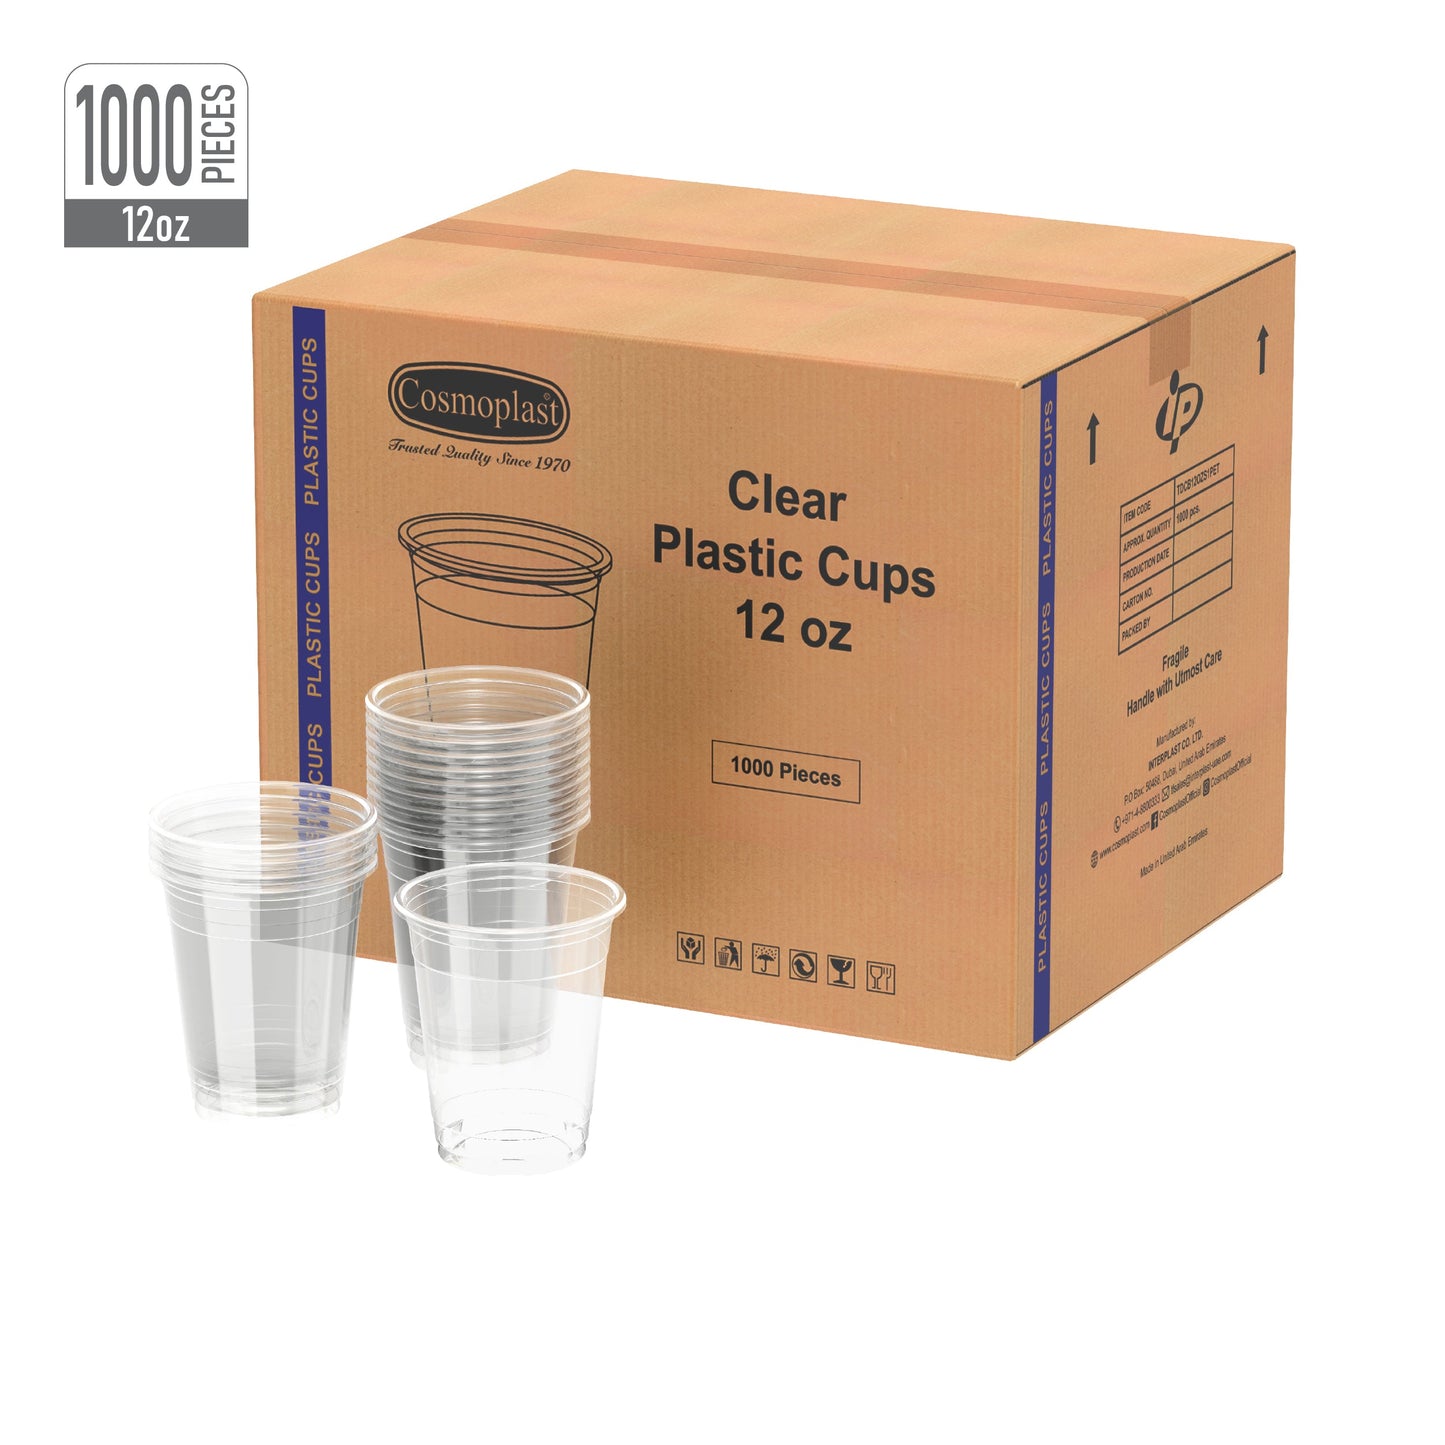 12 oz Clear Plastic Cups Carton of 1000